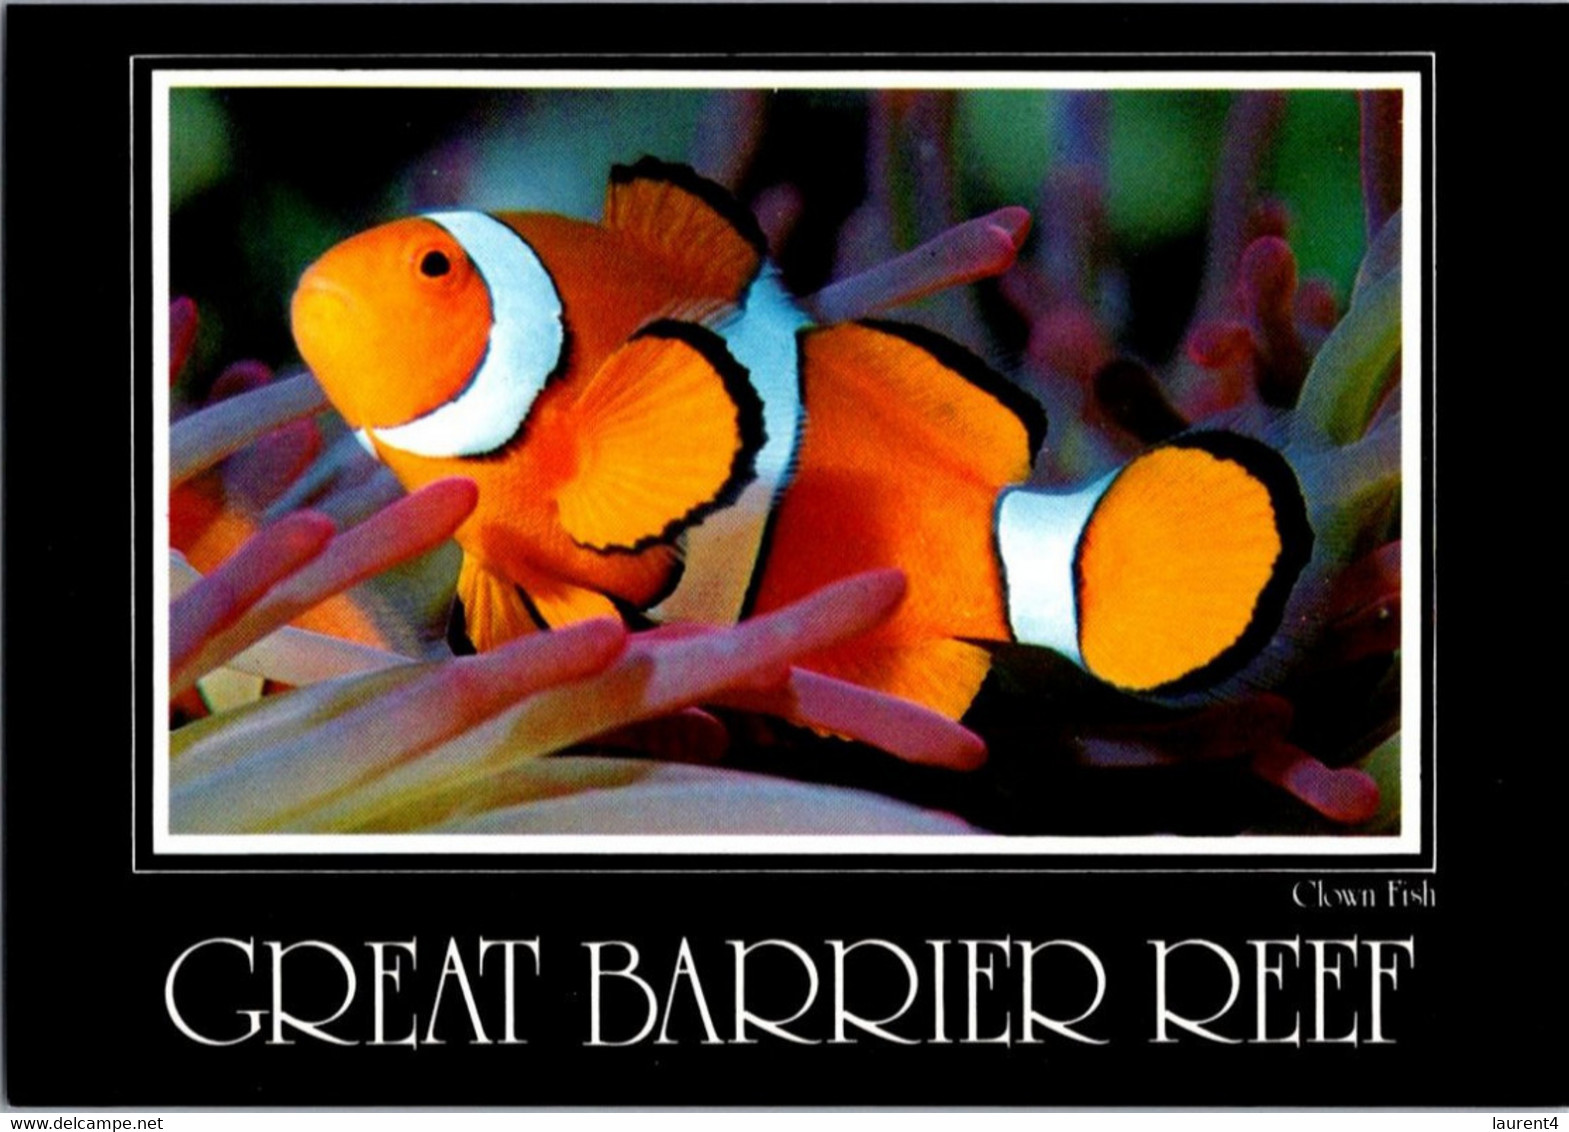 (2 E 7) Australia - QLD - Great Varrier Reef - Anemone Fish - Great Barrier Reef